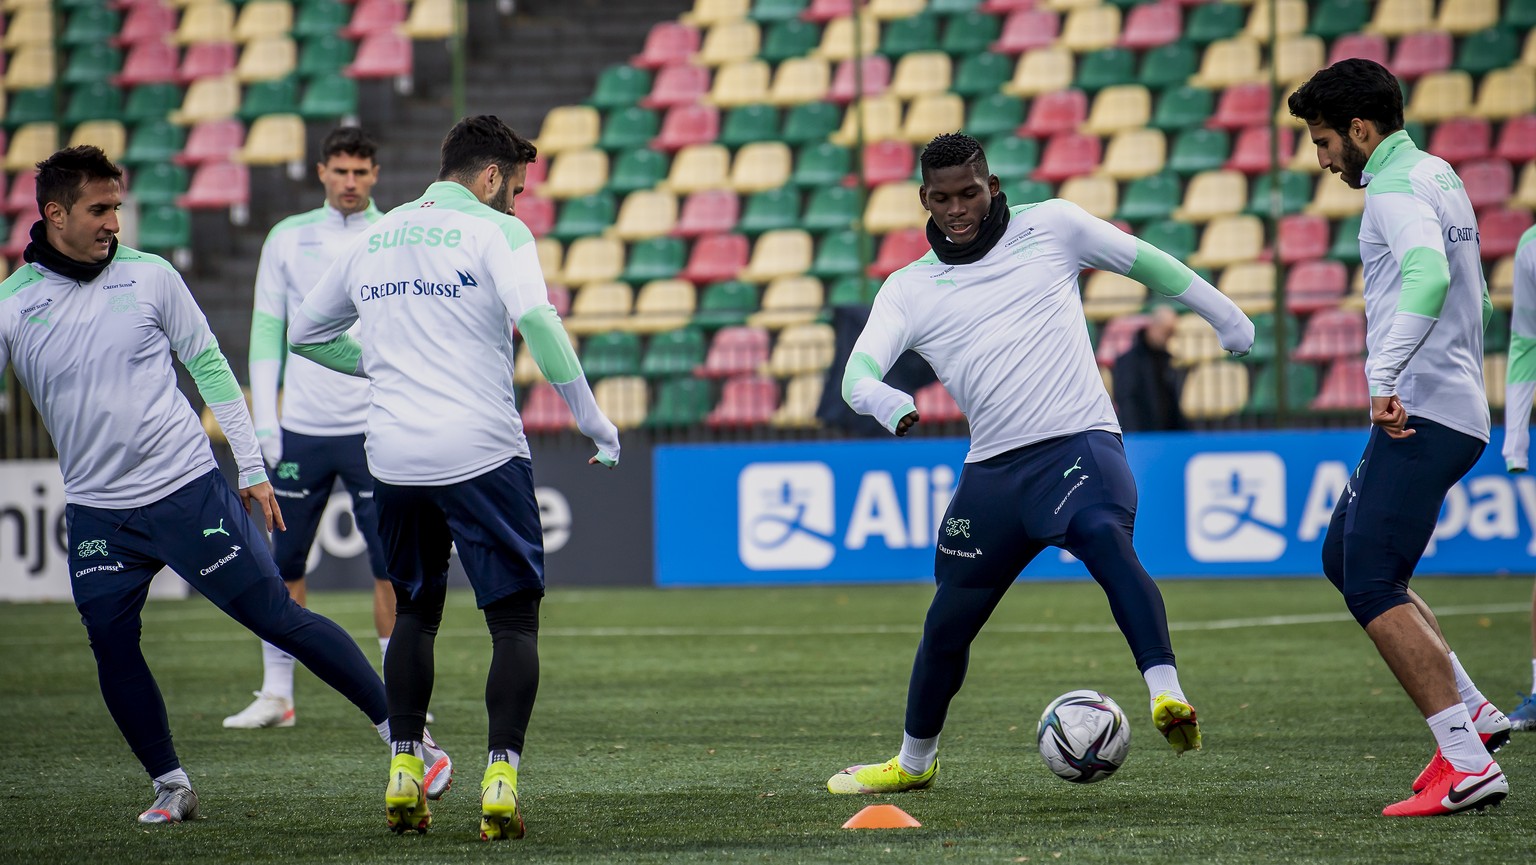 Switzerland's forward Breel Embolo plays the ball with teammates during a training session one day before the 2022 FIFA World Cup European Qualifying Group C soccer match against Lithuania at LFF stad ...